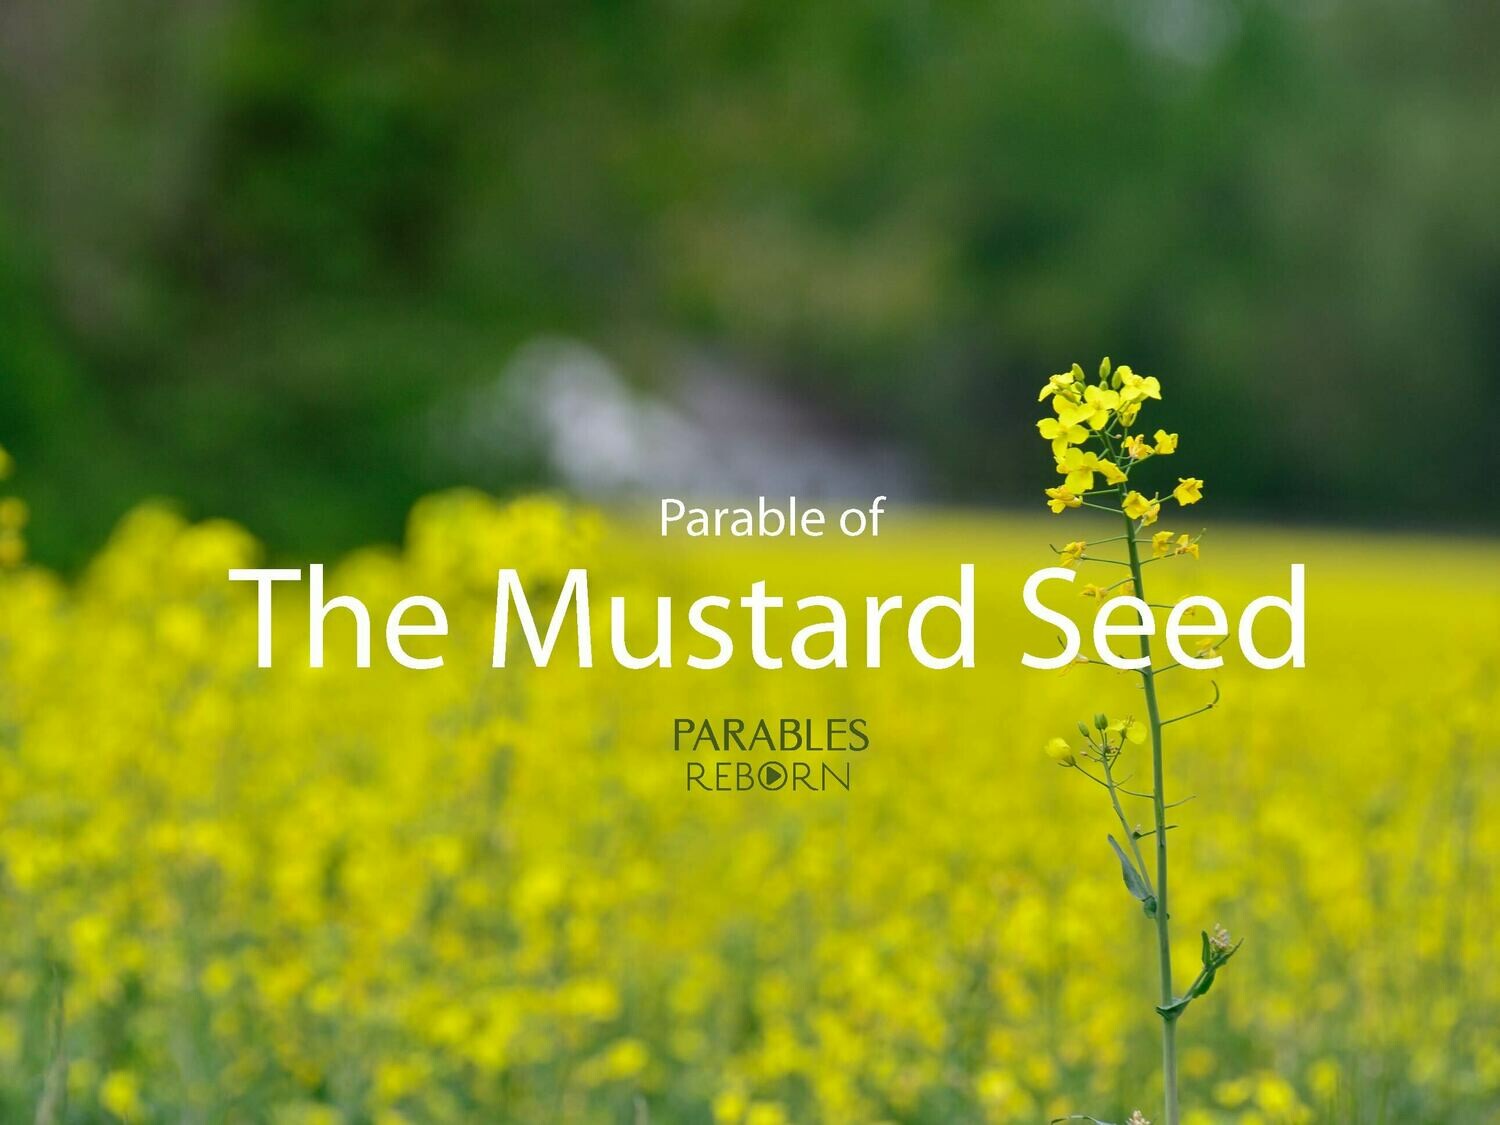 09 Parables Reborn, The Mustard Seed